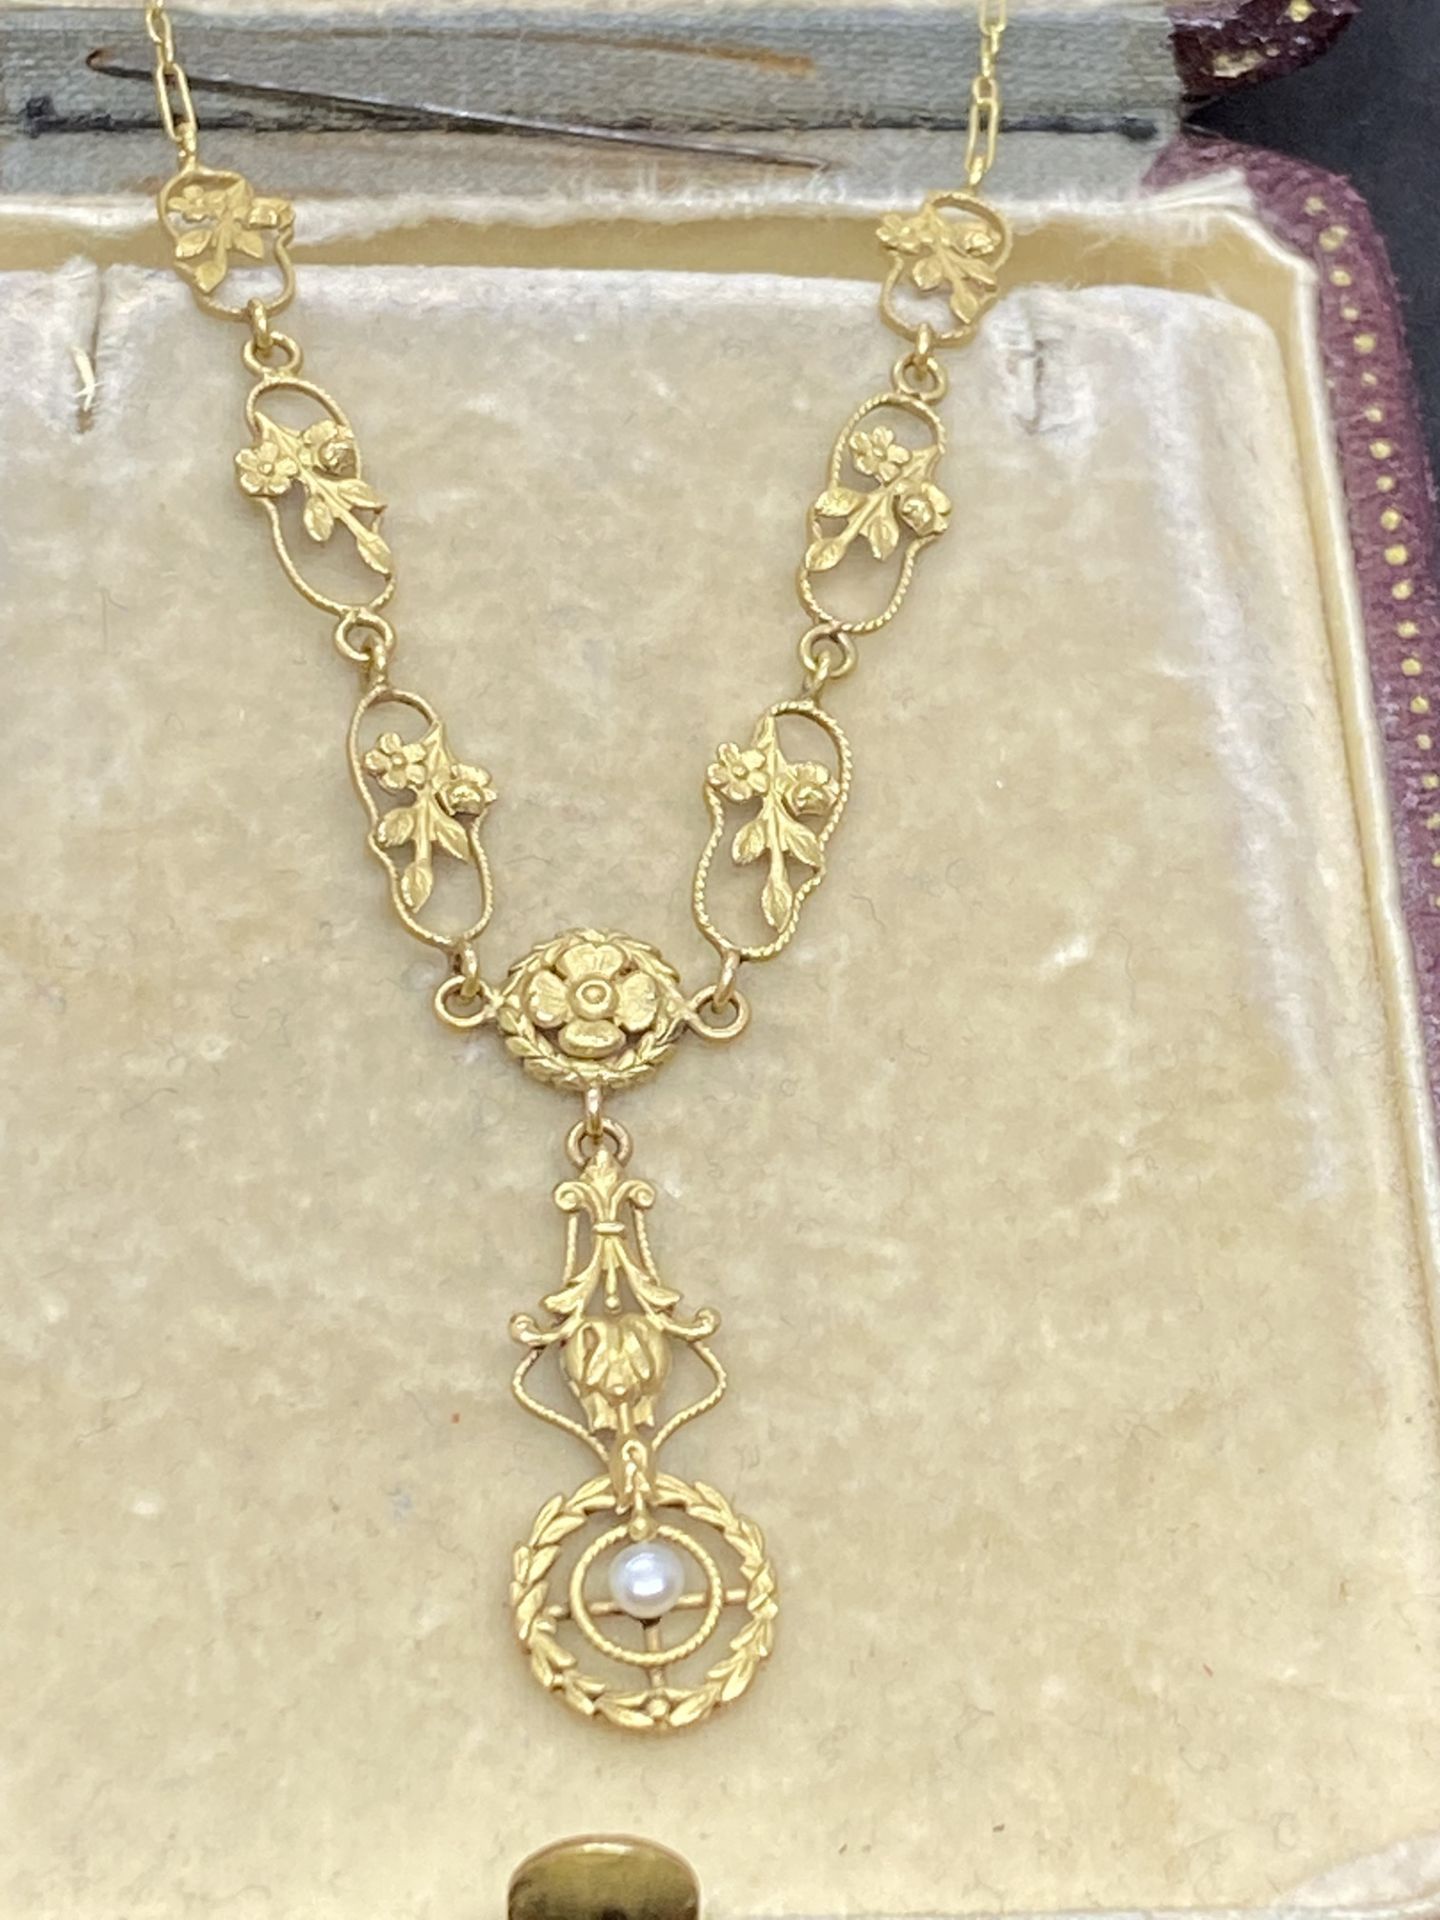 ANTIQUE FRENCH 18ct GOLD PENDANT SET WITH SEED PEARLS